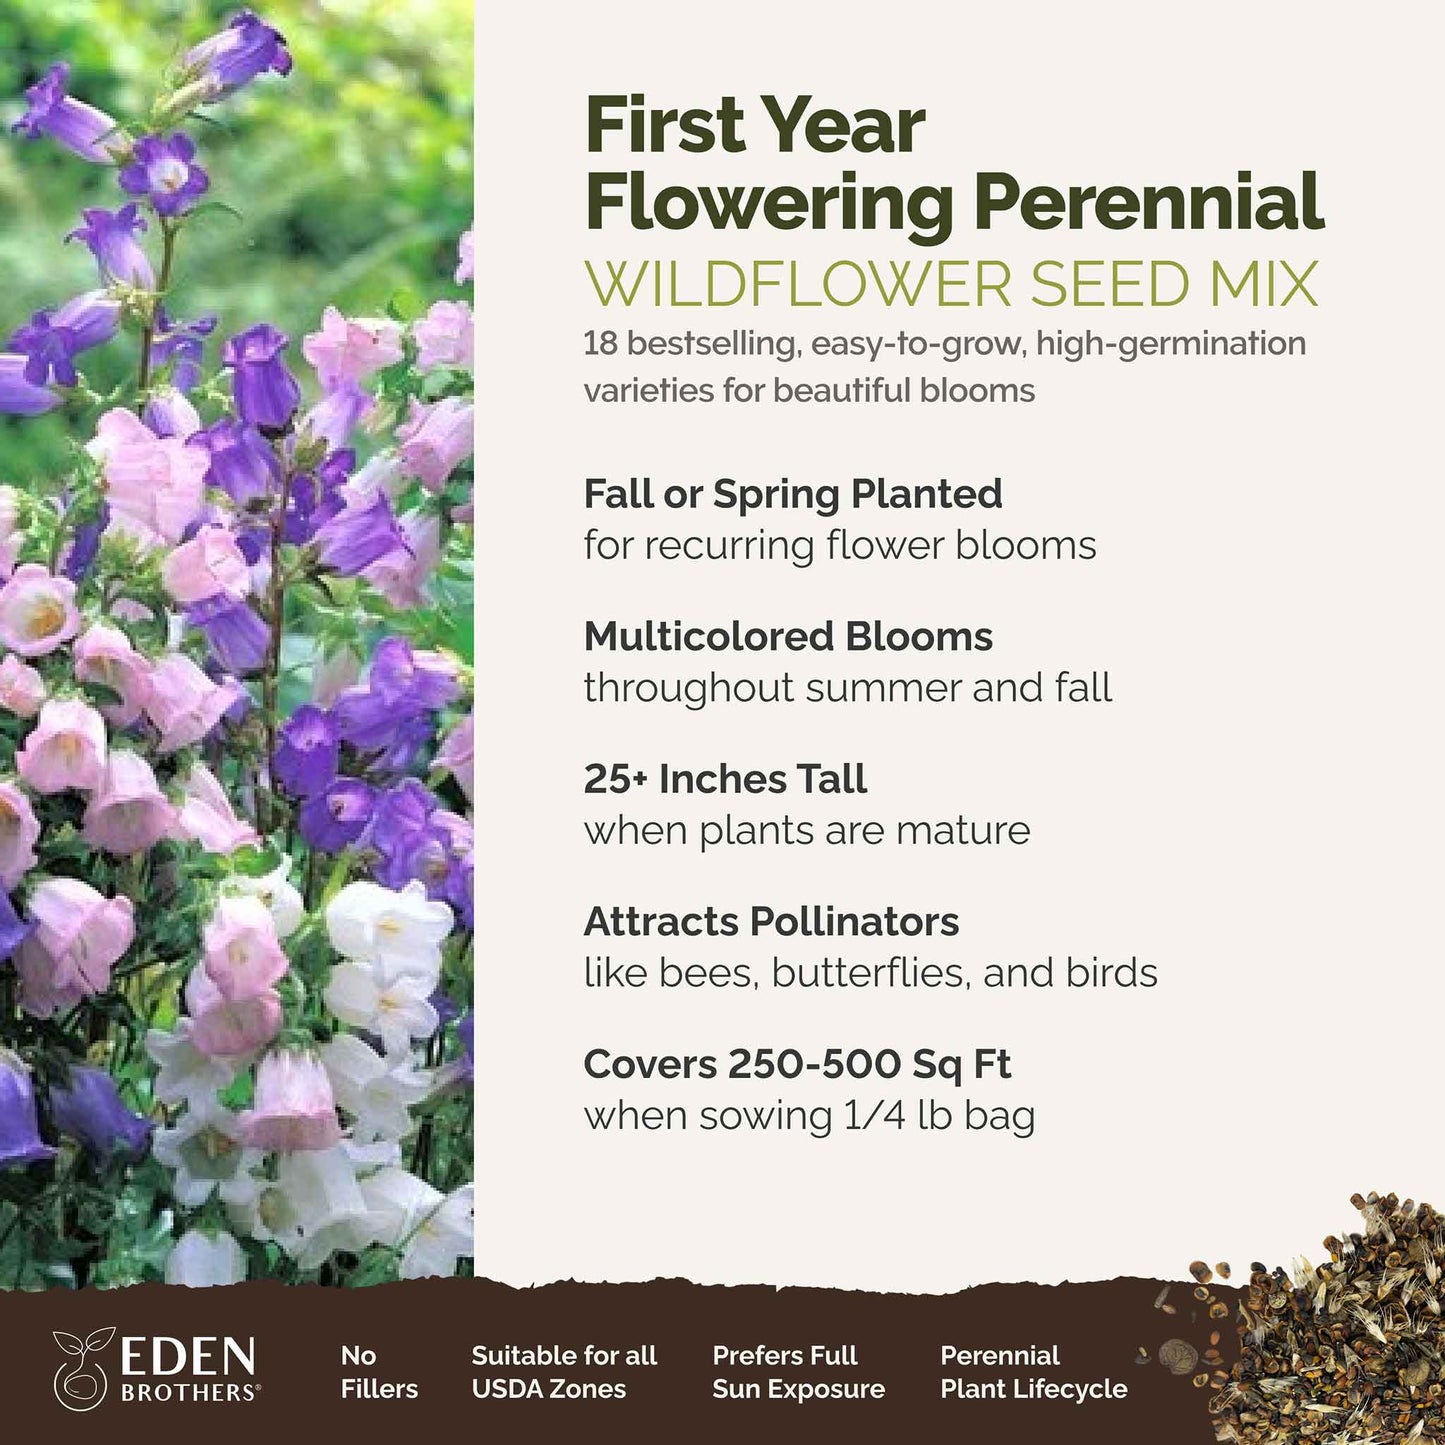 first year flowering perennial overview